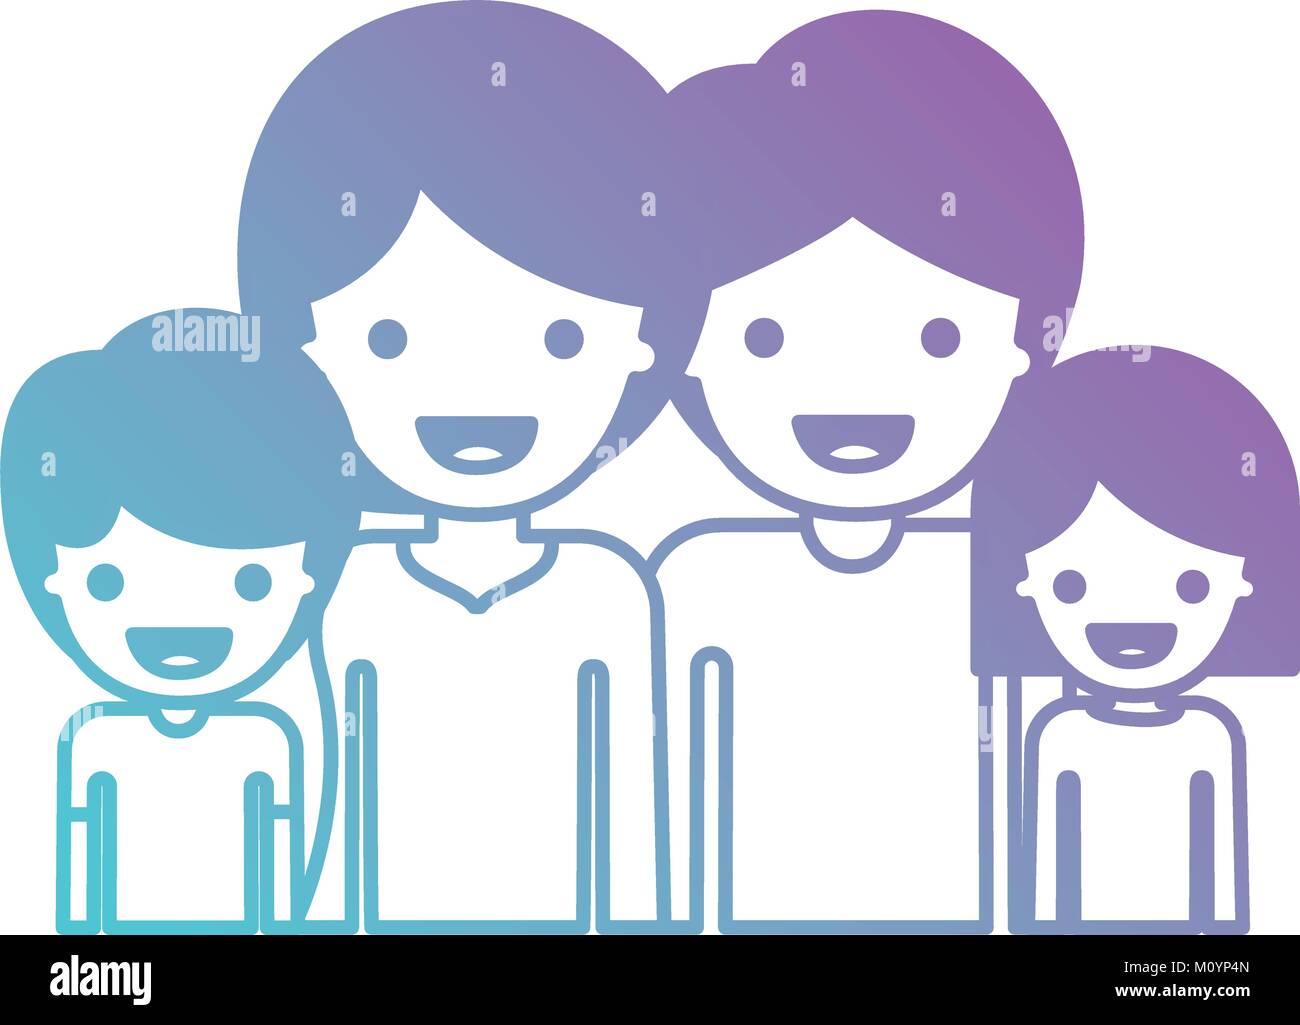 Half Body People With Woman And Girl And Man And Boy With Short Hair In Degraded Blue To Purple Color Silhouette Stock Vector Image Art Alamy